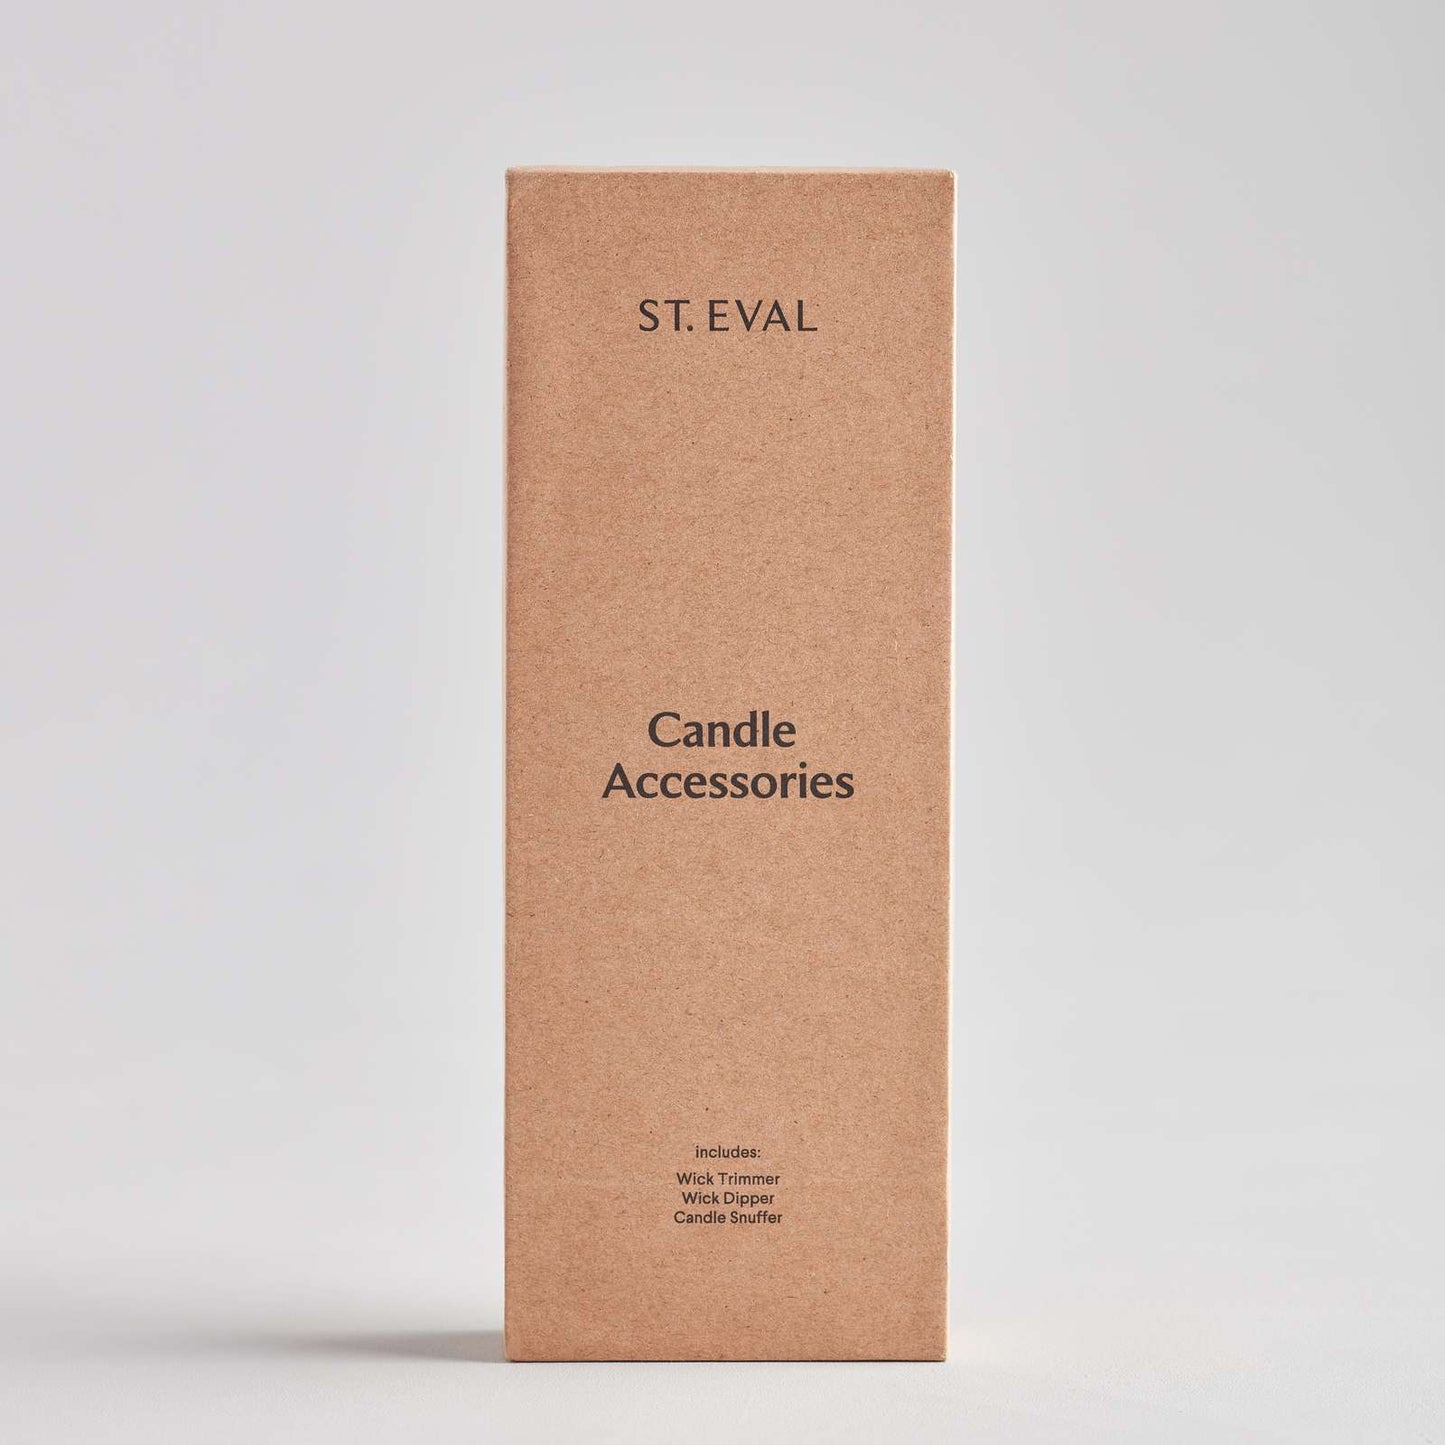 St Eval Candle Accessories Gift Set